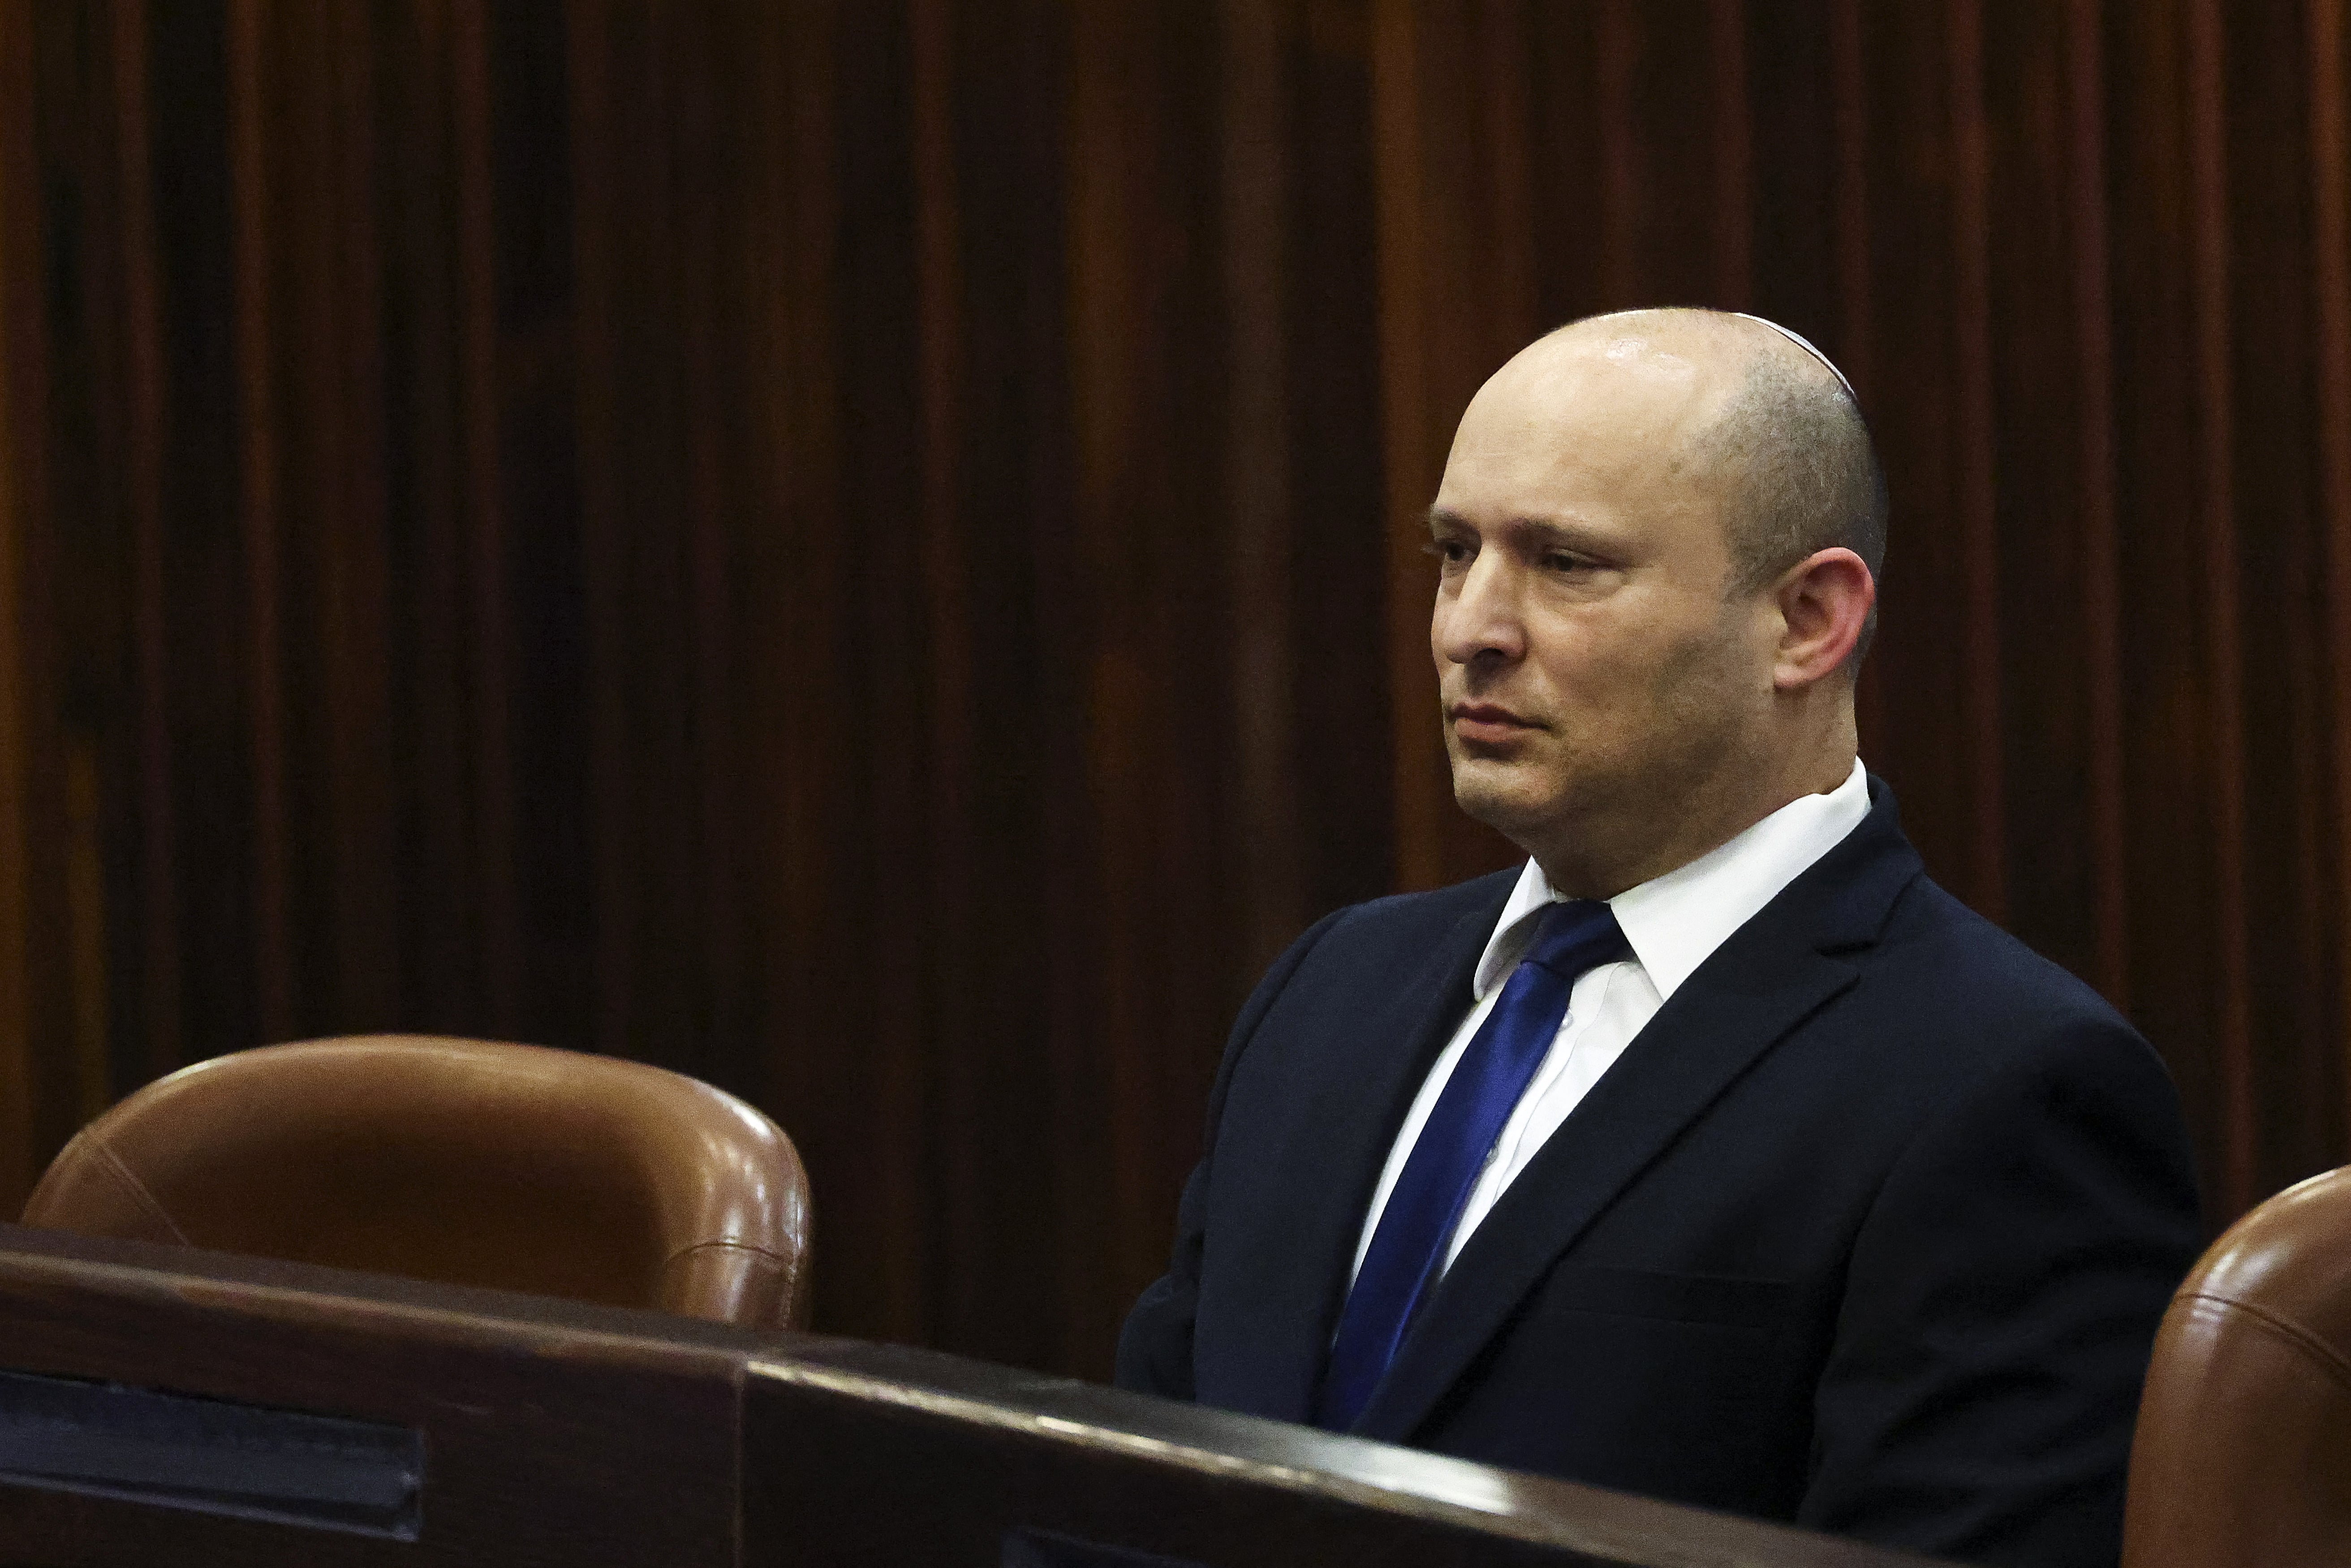 Naftali Bennett, Israeli parliament member from Yamina party, attends a special session of the Knesset, Israel's parliament, in which MPs will elect a new president, in Jerusalem on 2 June, 2021. (AFP)